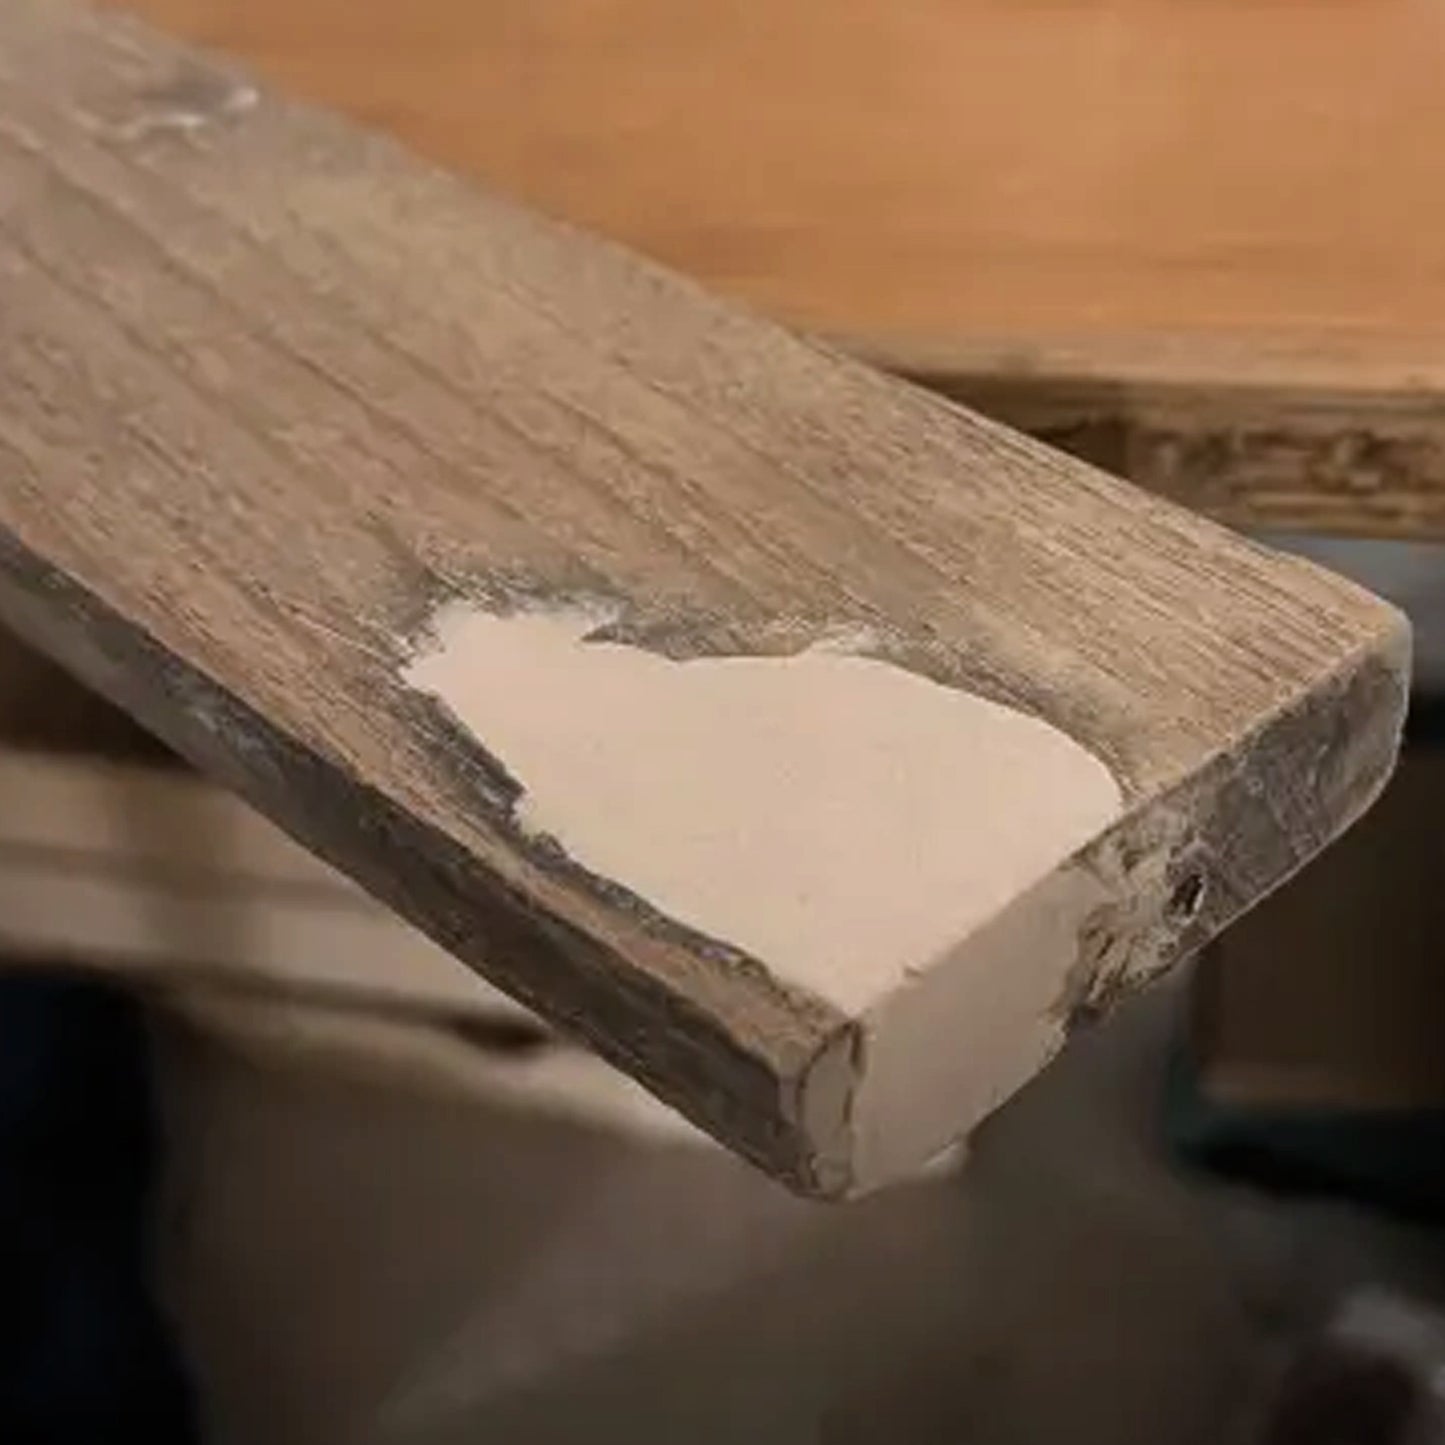 Epoxy Wood Filler - A Sustainable Wood Repair Solution